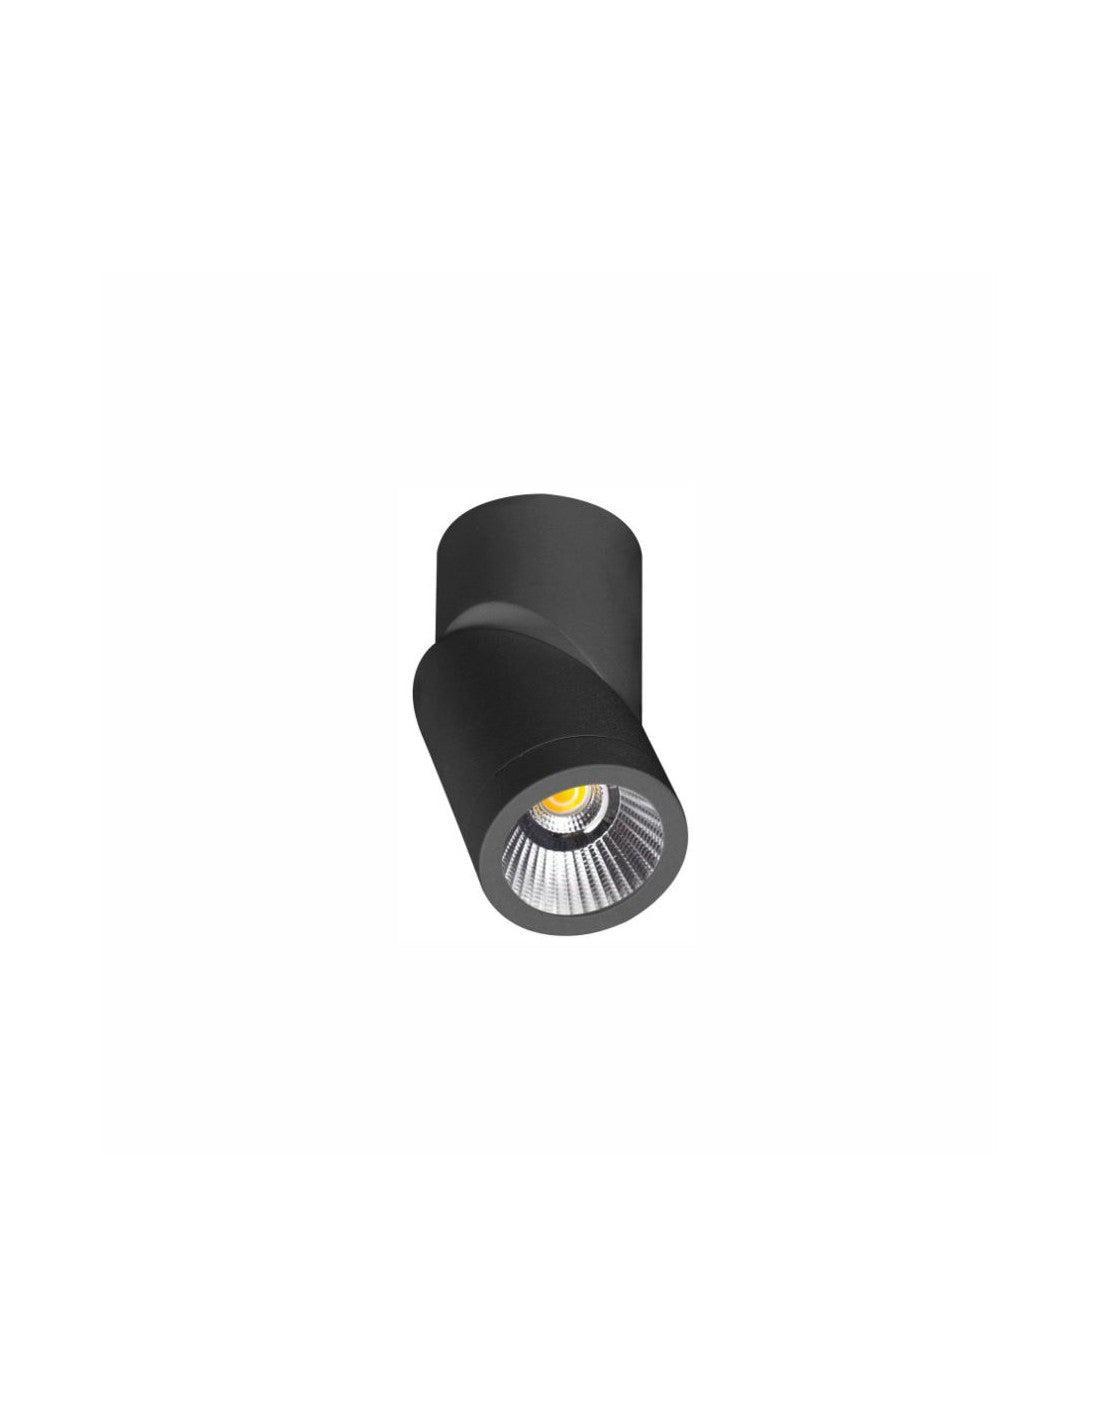 Applique Adjustable Cylindrical Spotlight Plus Black Led 8w Switch Beneito Faure - 4523 